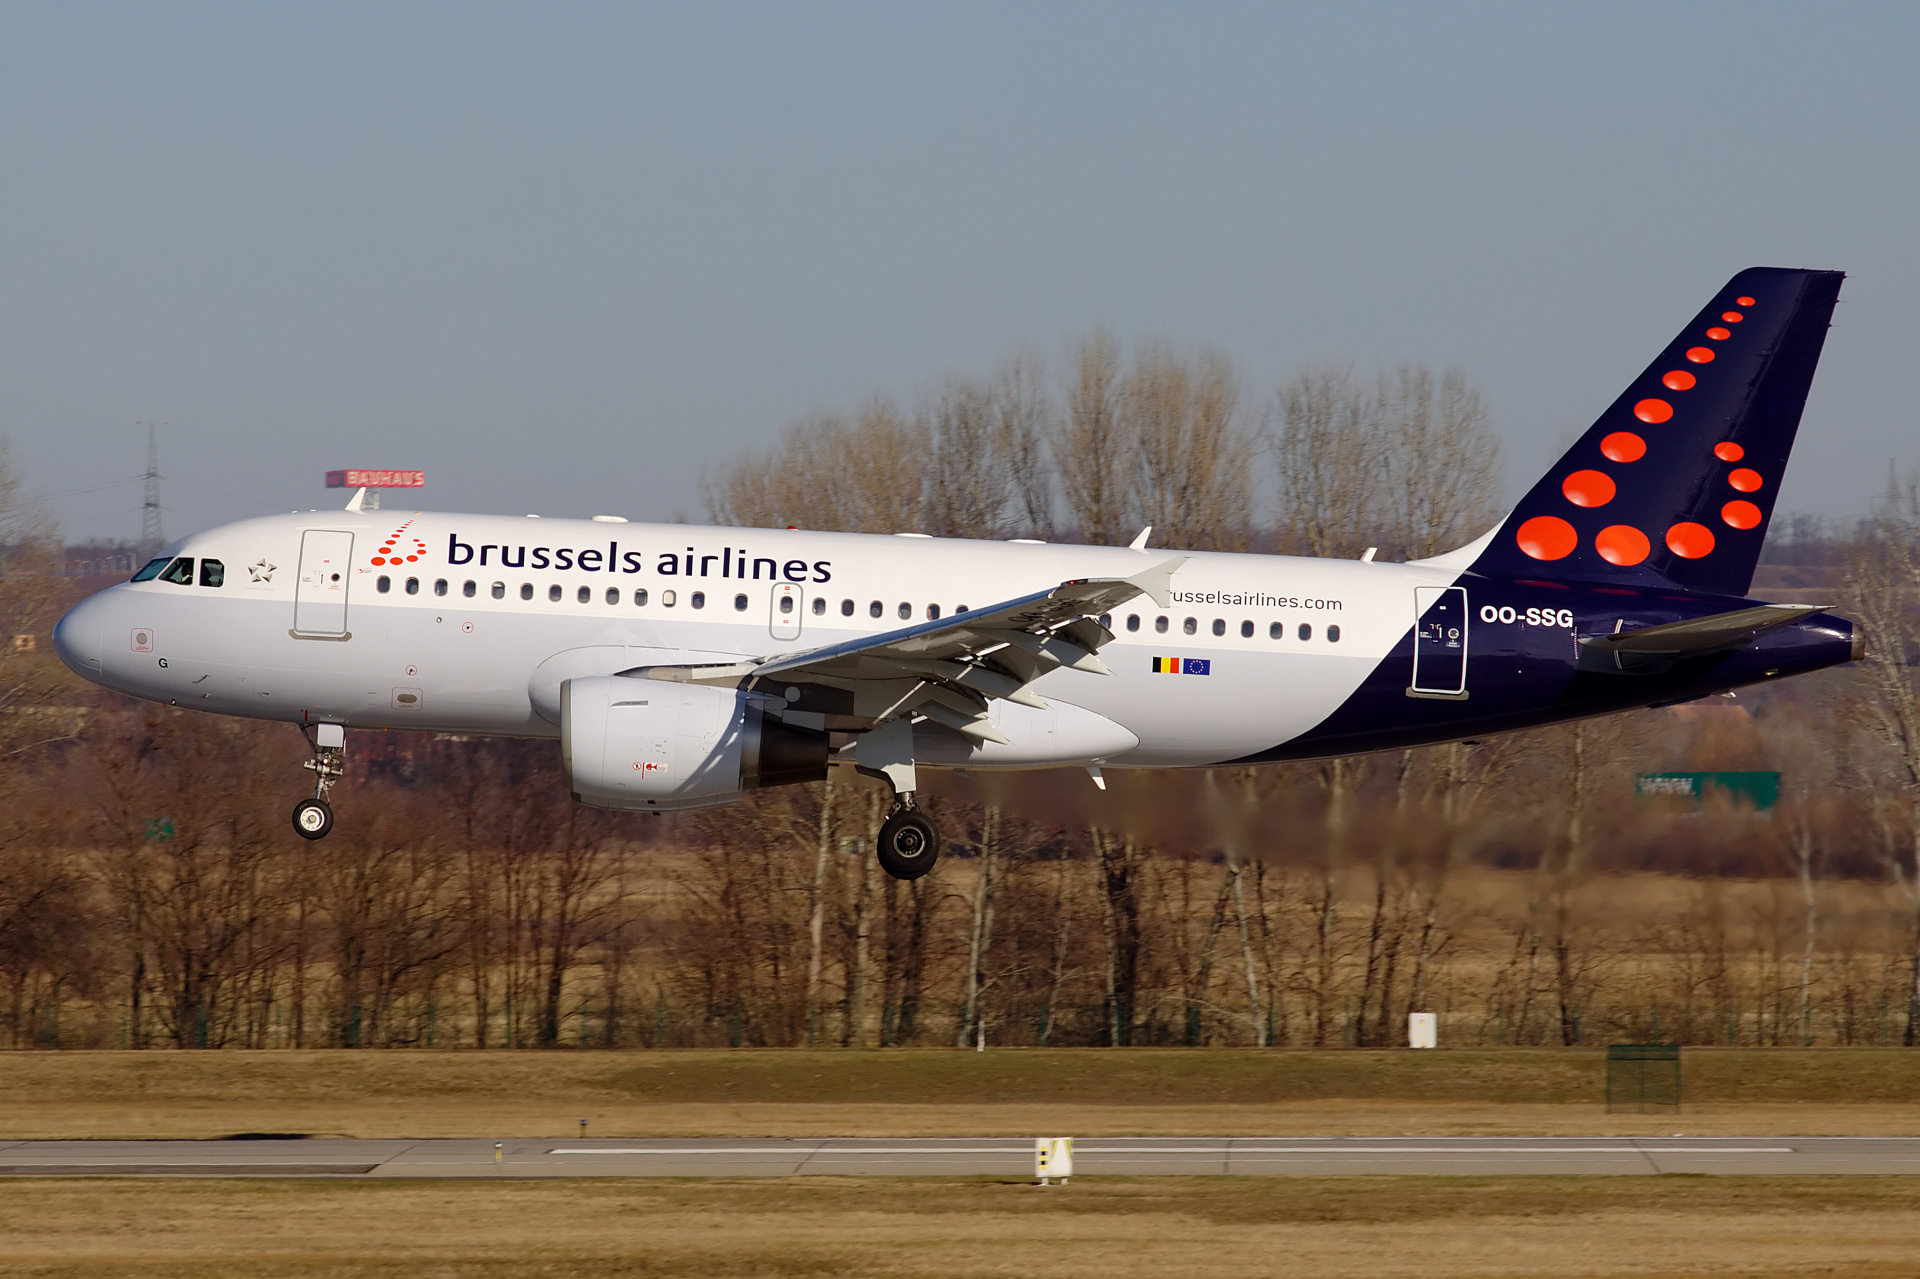 OO-SSG, Brussels Airlines (Samoloty » Spotting na Ferihegy » Airbus A319-100)